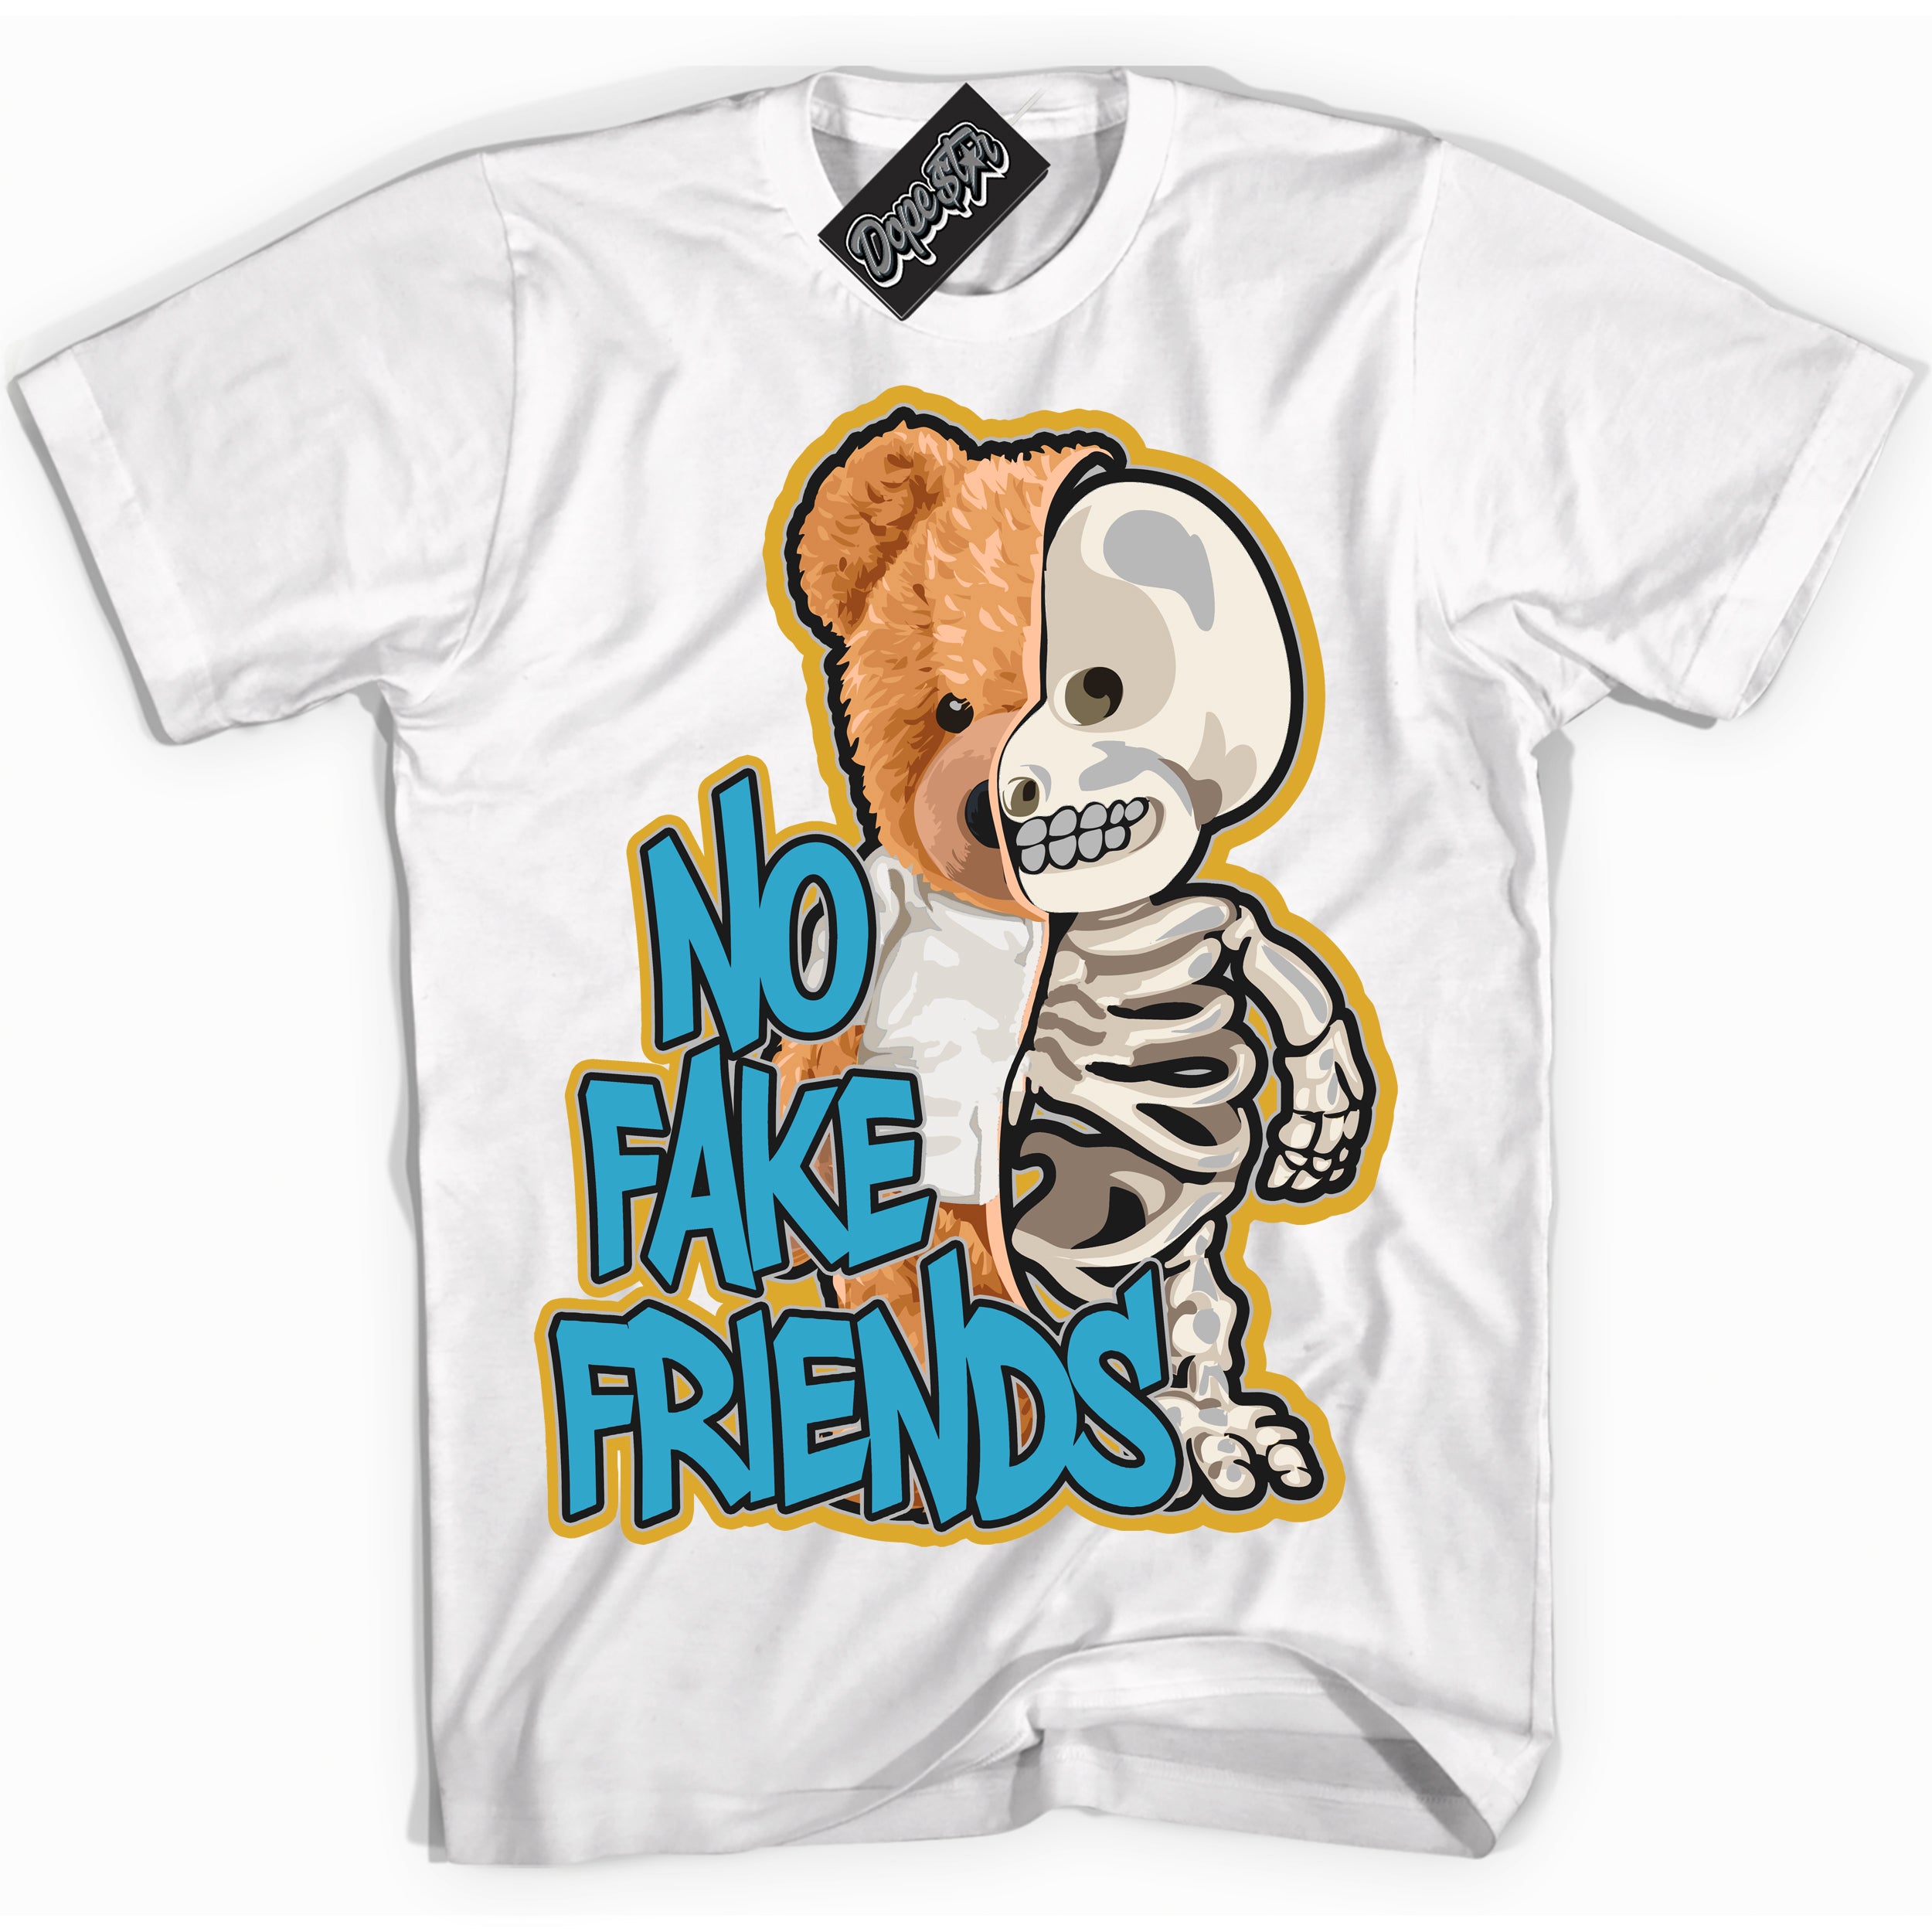 Cool White Shirt with “ No Fake Friends” design that perfectly matches Aqua 5s Sneakers.